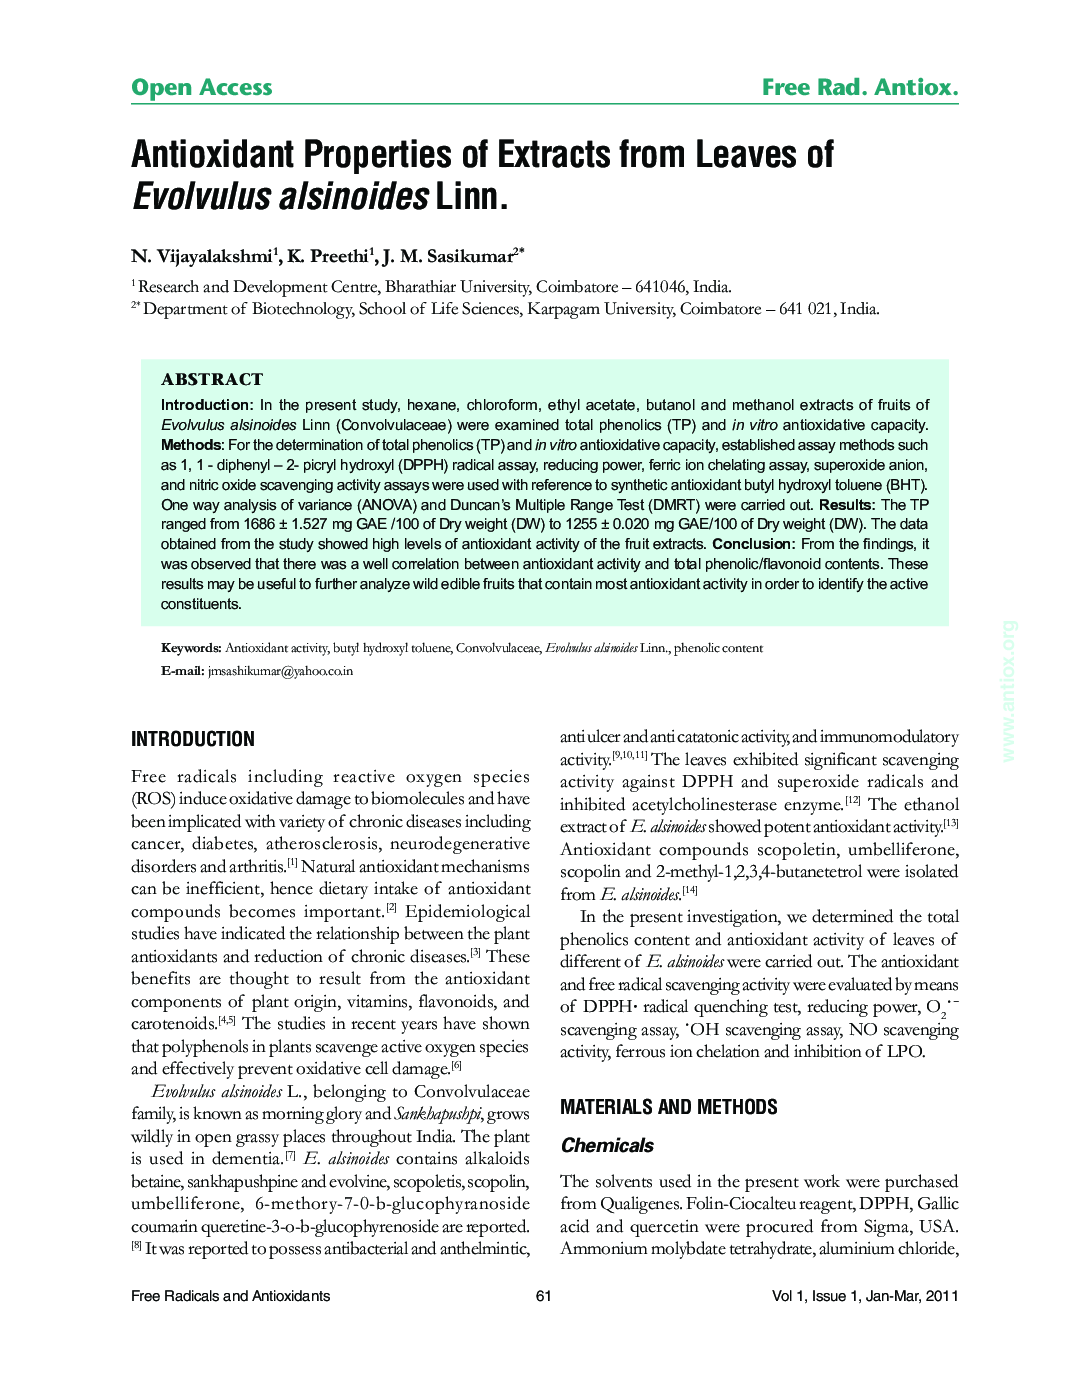 Antioxidant Properties of Extracts from Leaves of Evolvulus alsinoides Linn.